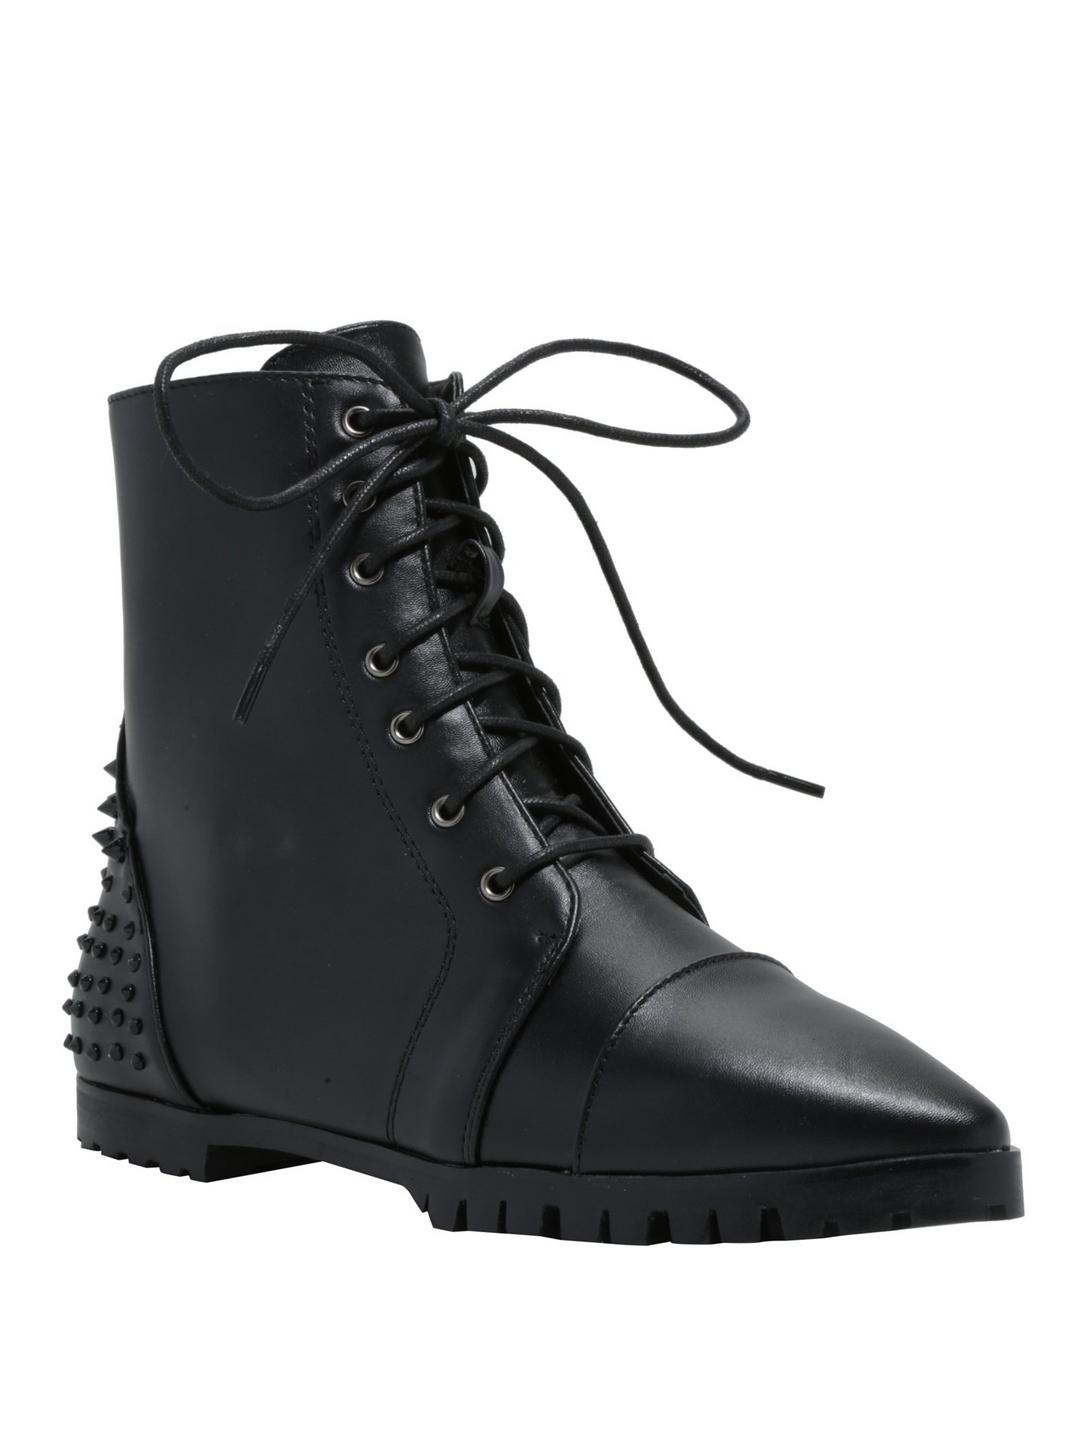 Black Studded Pointed-Toe Ankle Booties, BLACK, hi-res